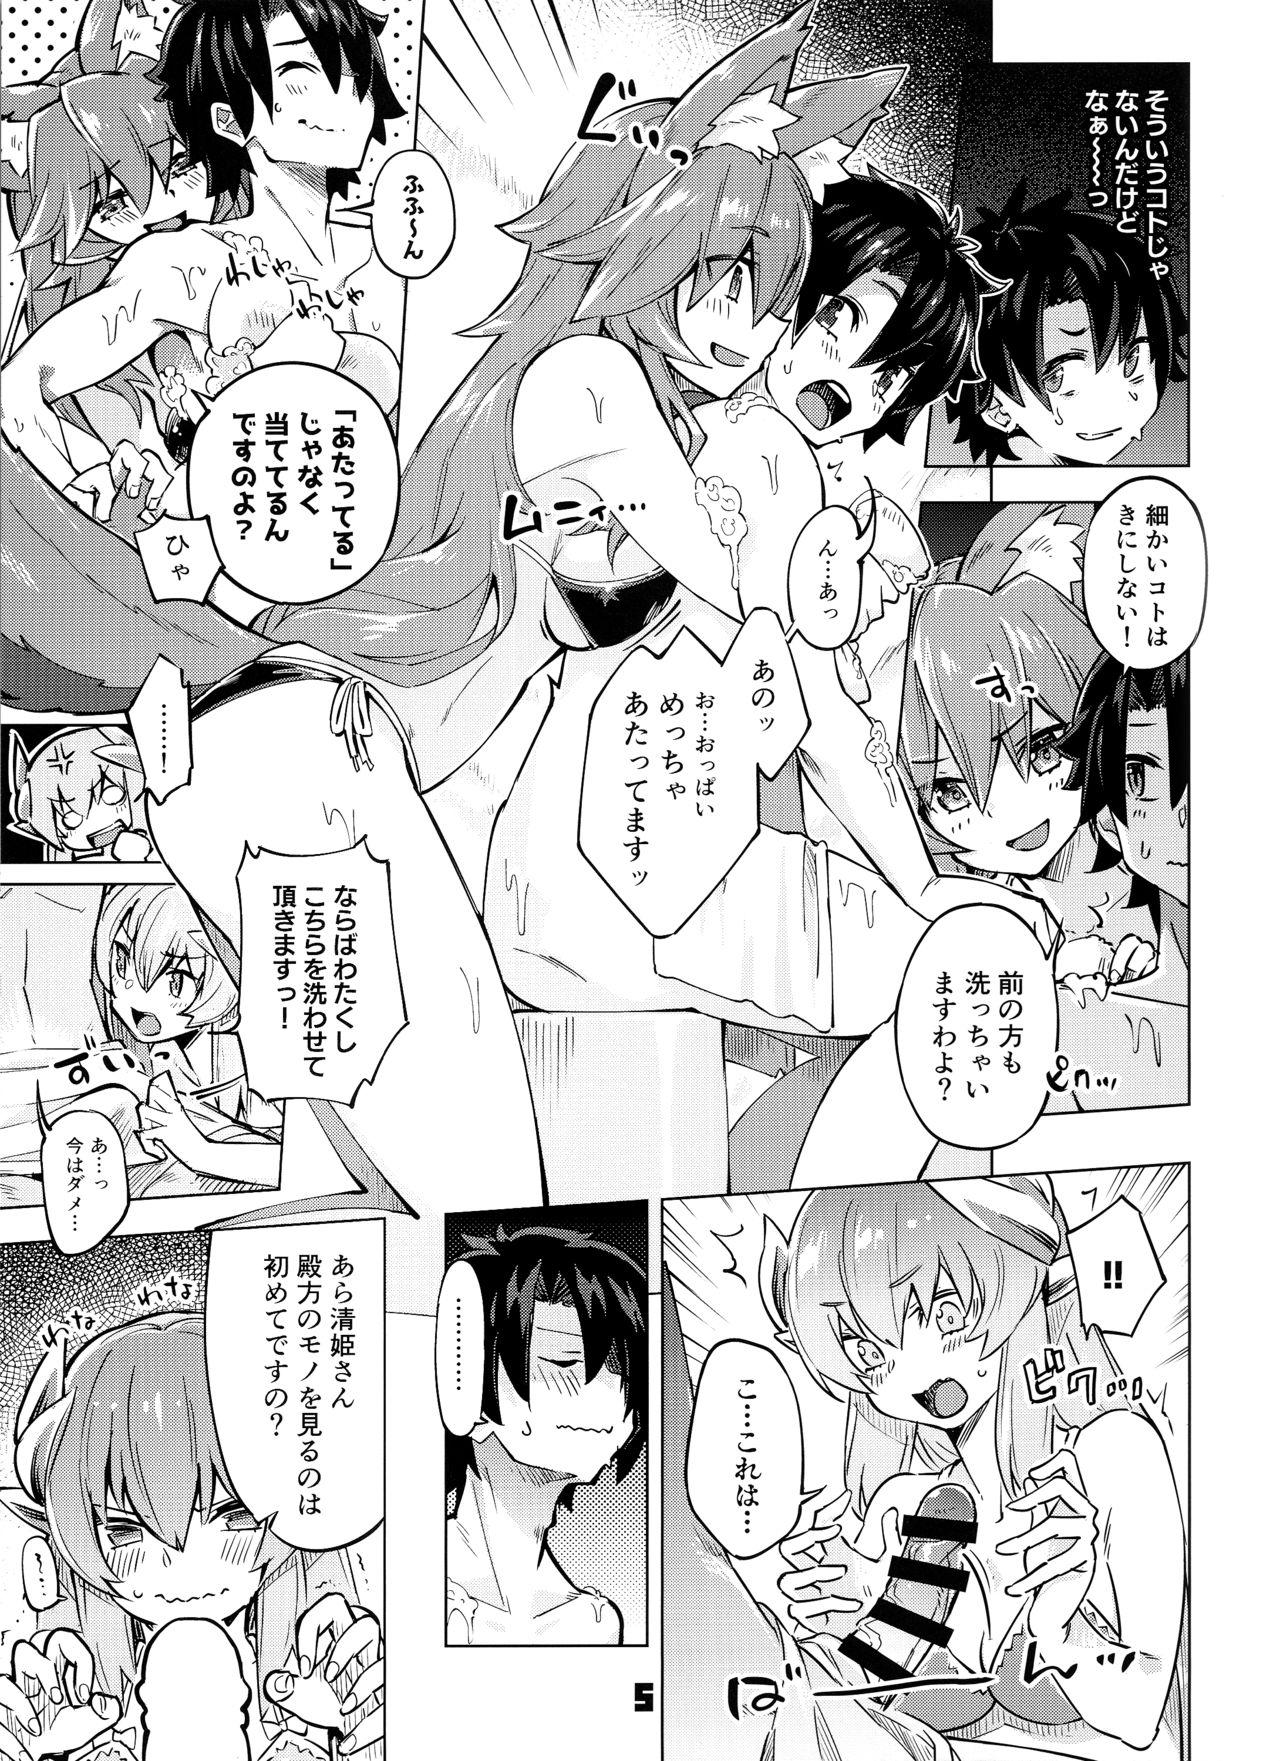 Nerd Sex Shinai to Derarenai My Room 2 - My room can not go out - Fate grand order Putaria - Page 4